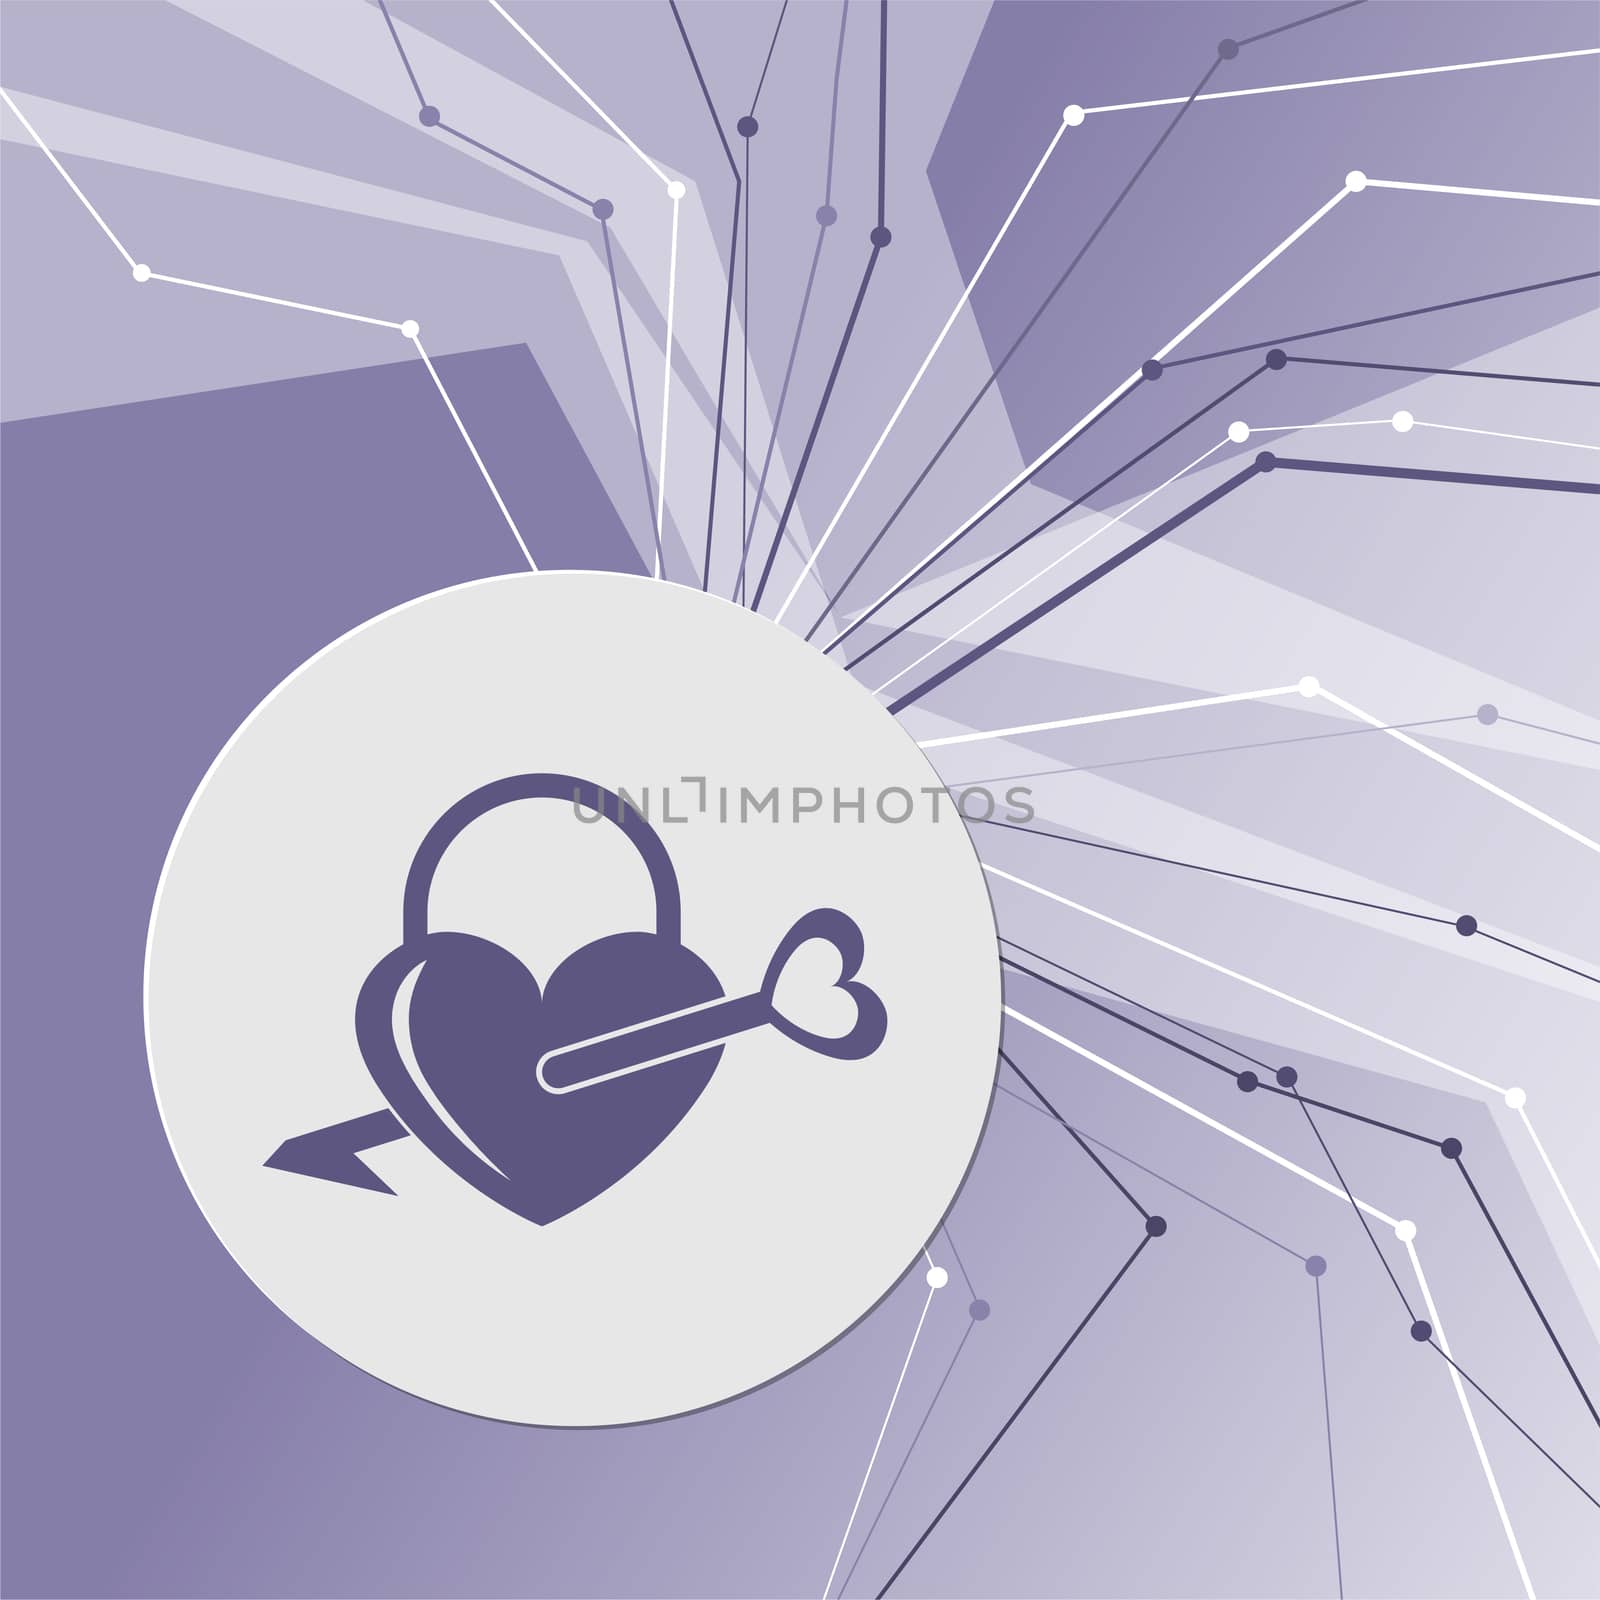 lock icons. A simple silhouette of the lock for the door. Shape of a heart. on purple abstract modern background. The lines in all directions. With room for your advertising. illustration